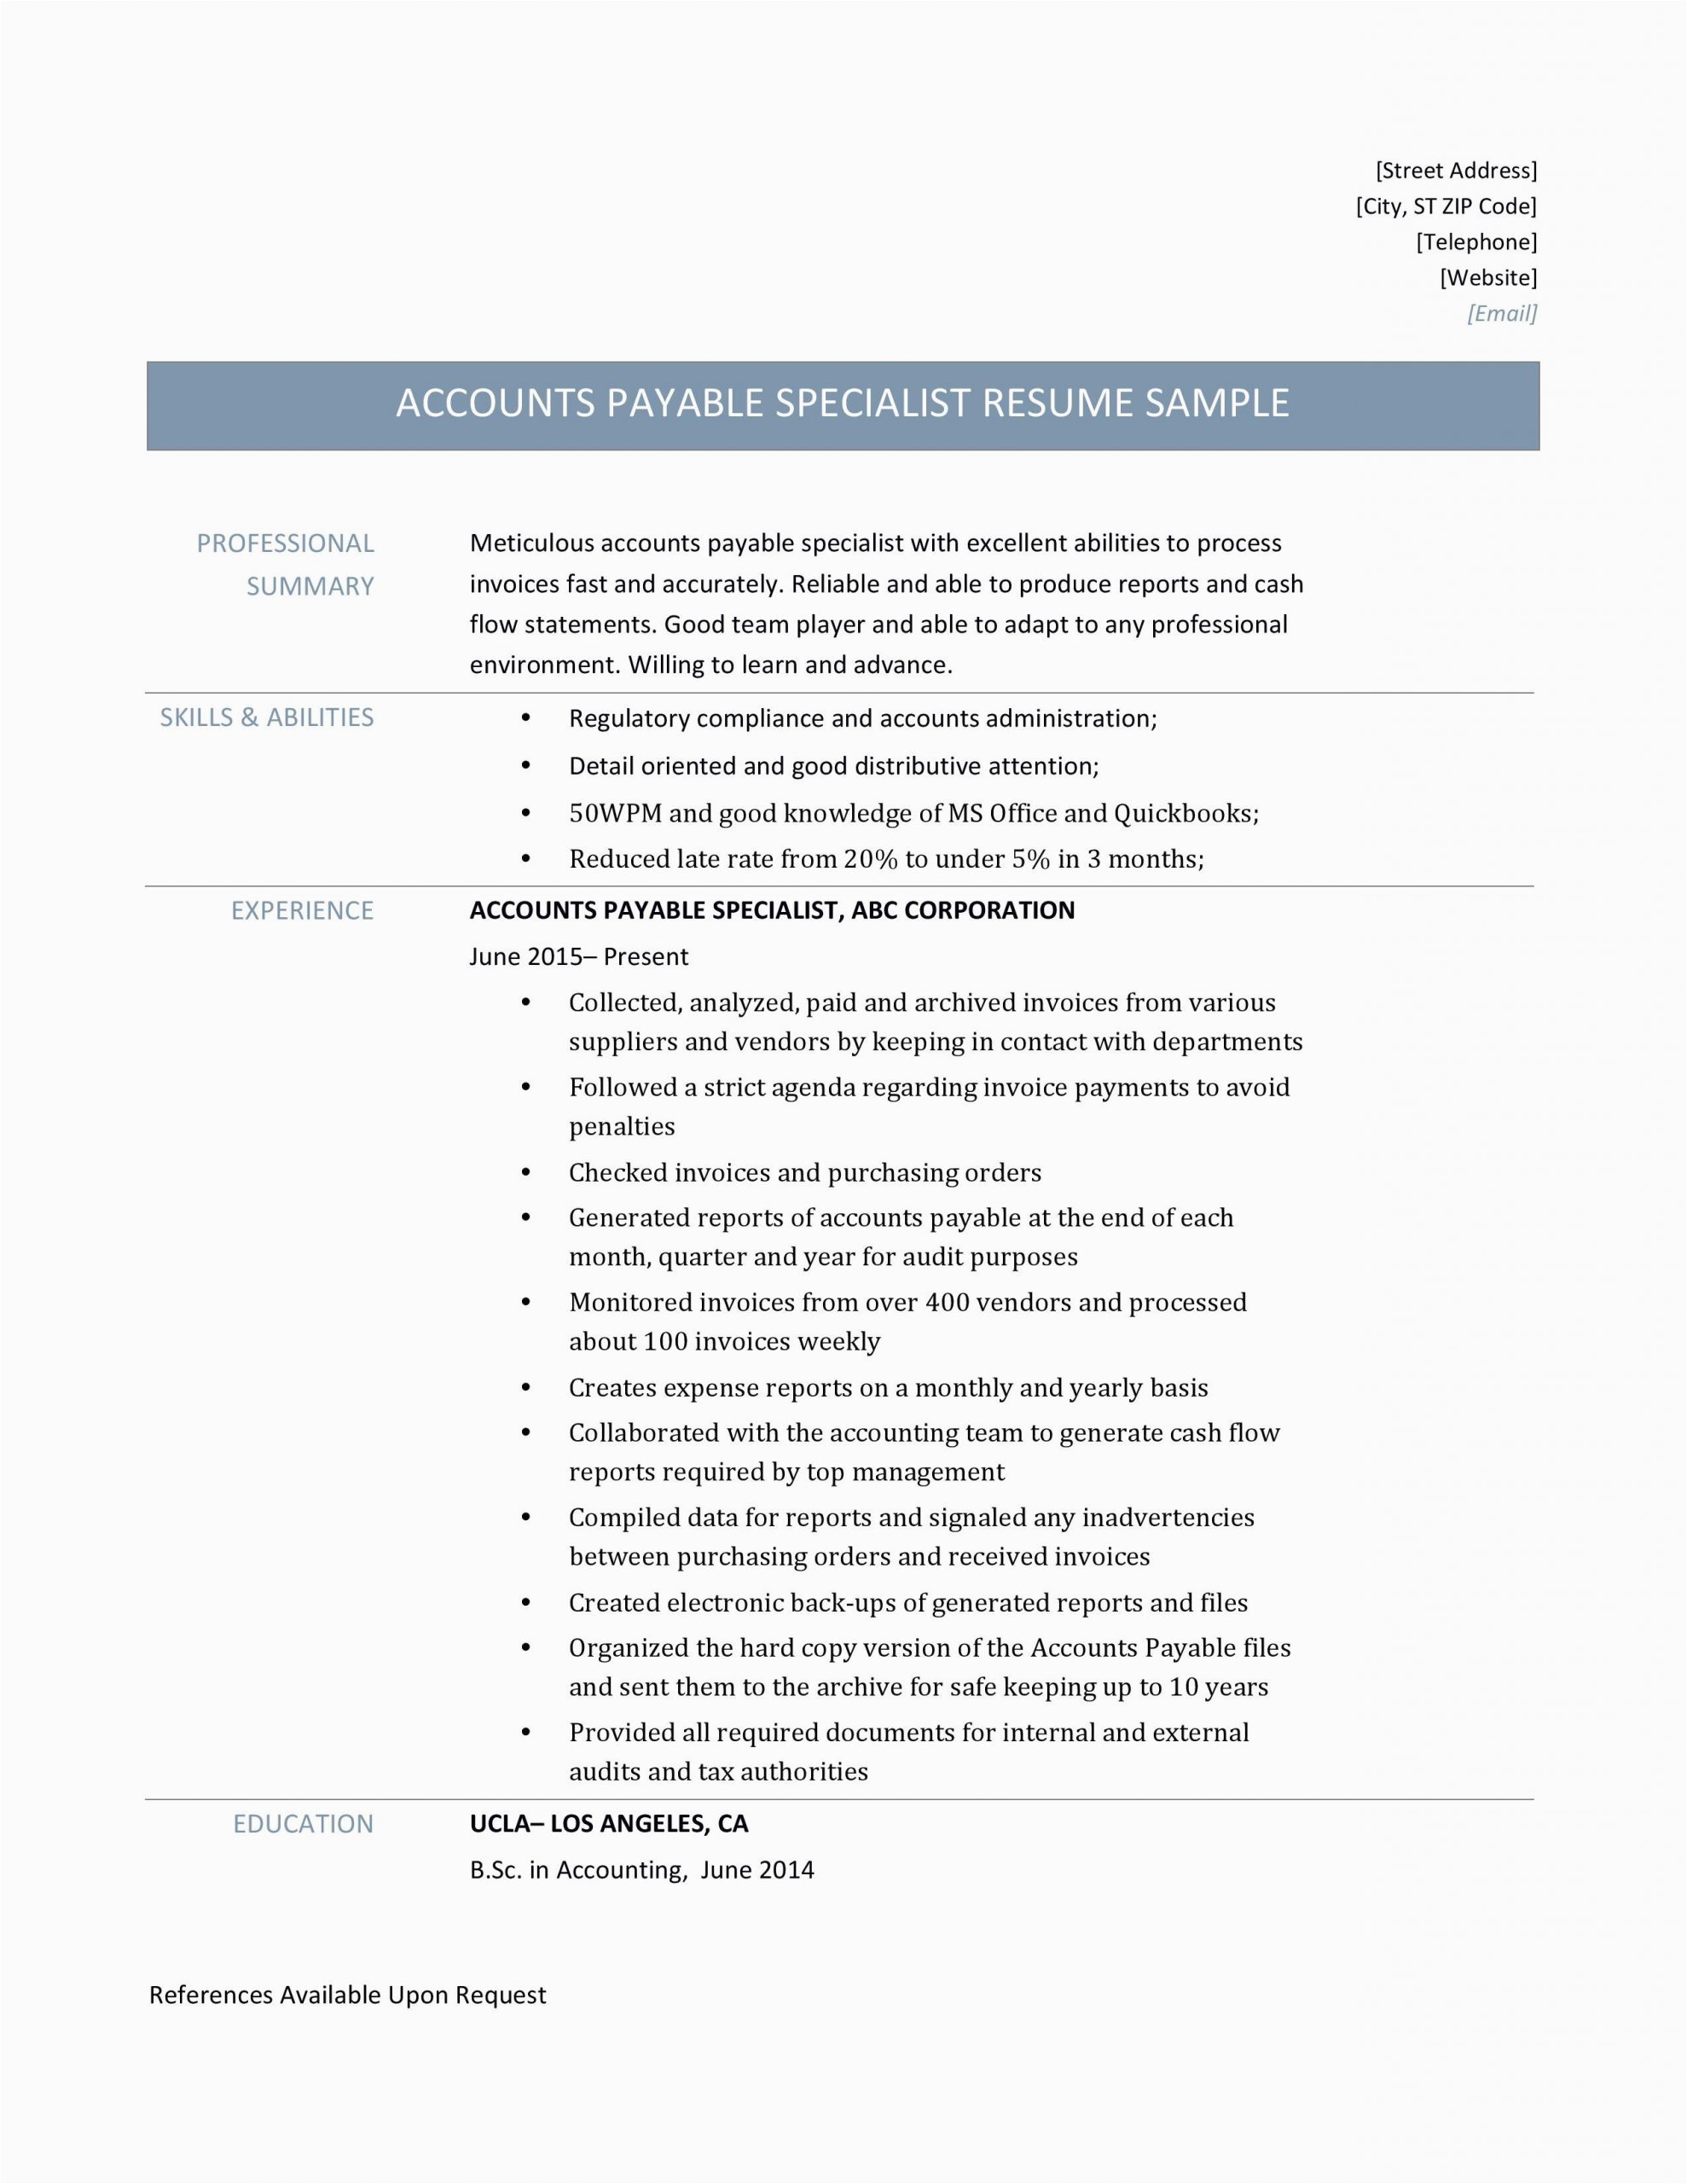 Sample Resume for Accounts Payable Analyst Accounts Payable Specialist Resume Samples Line Resume